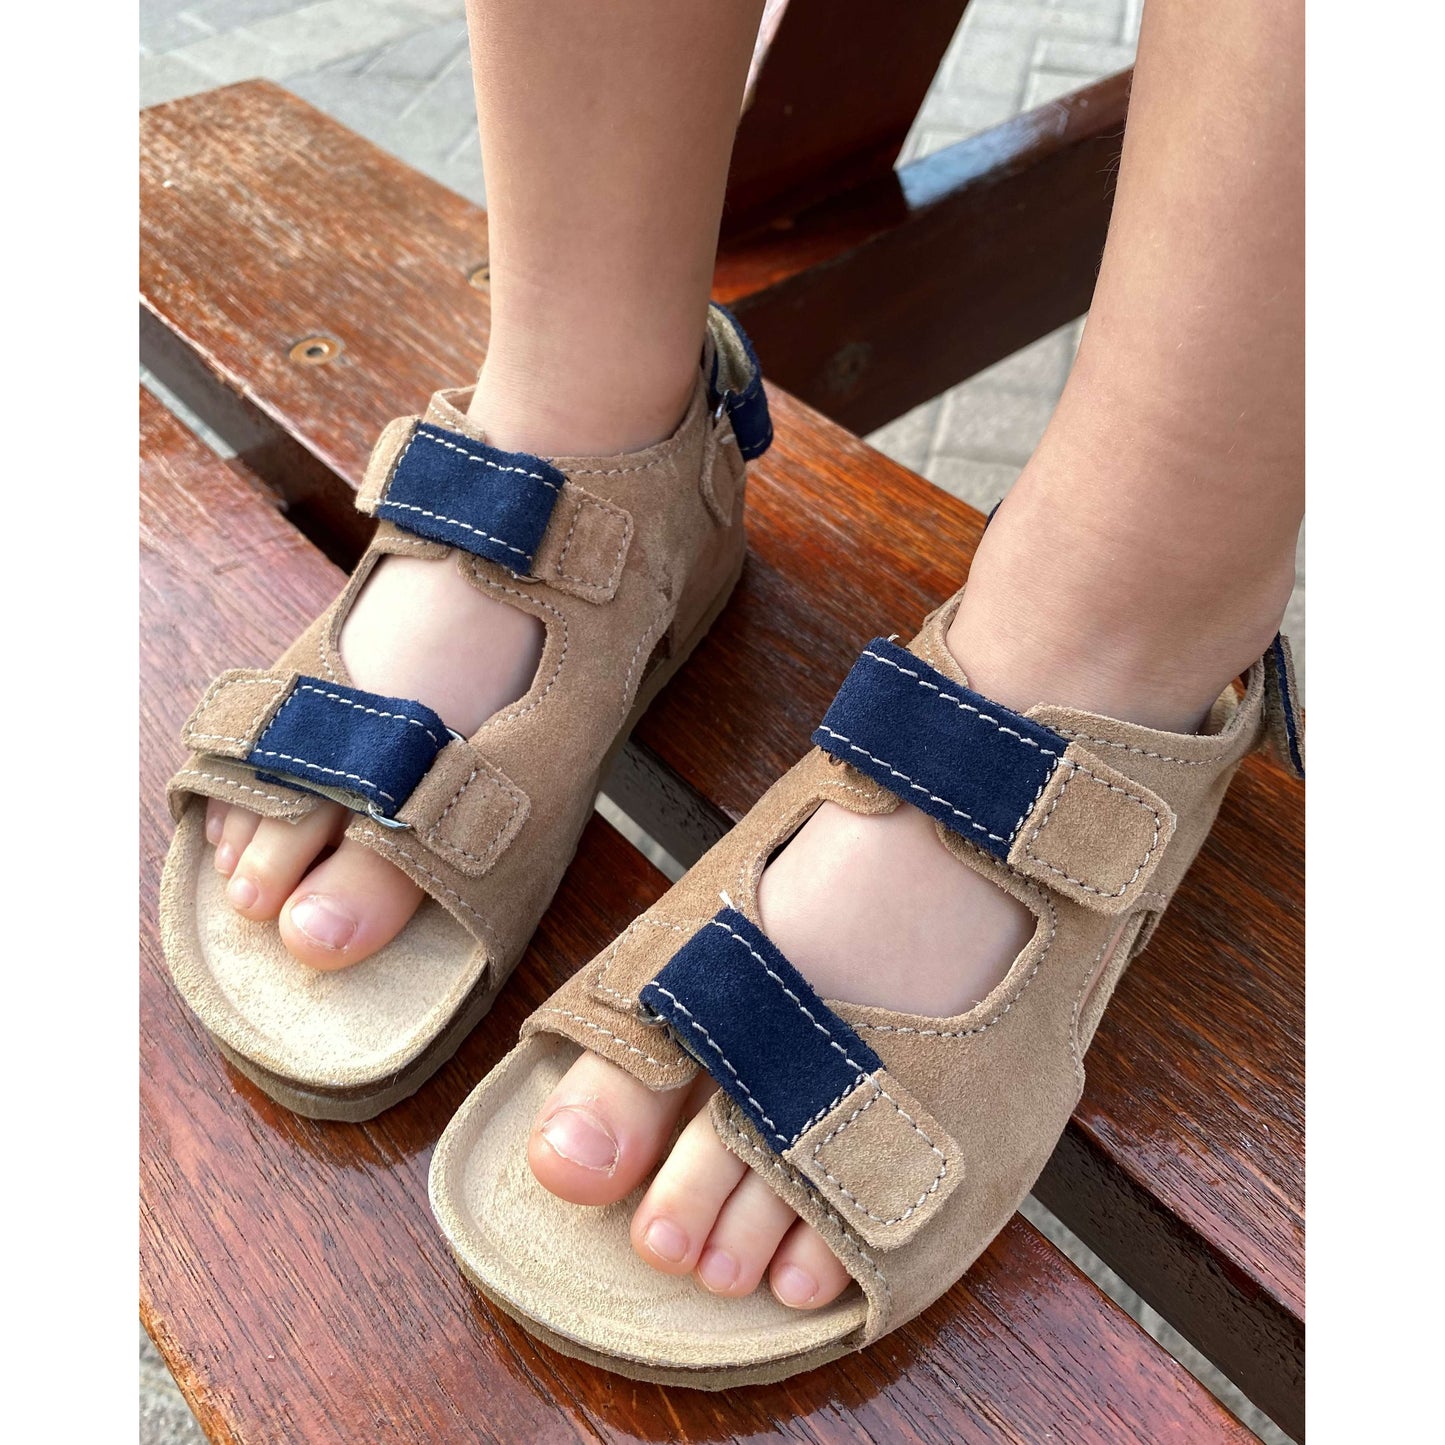 orthopedic older boys sandals  with open heel: T27: color brown - feelgoodshoes.ae